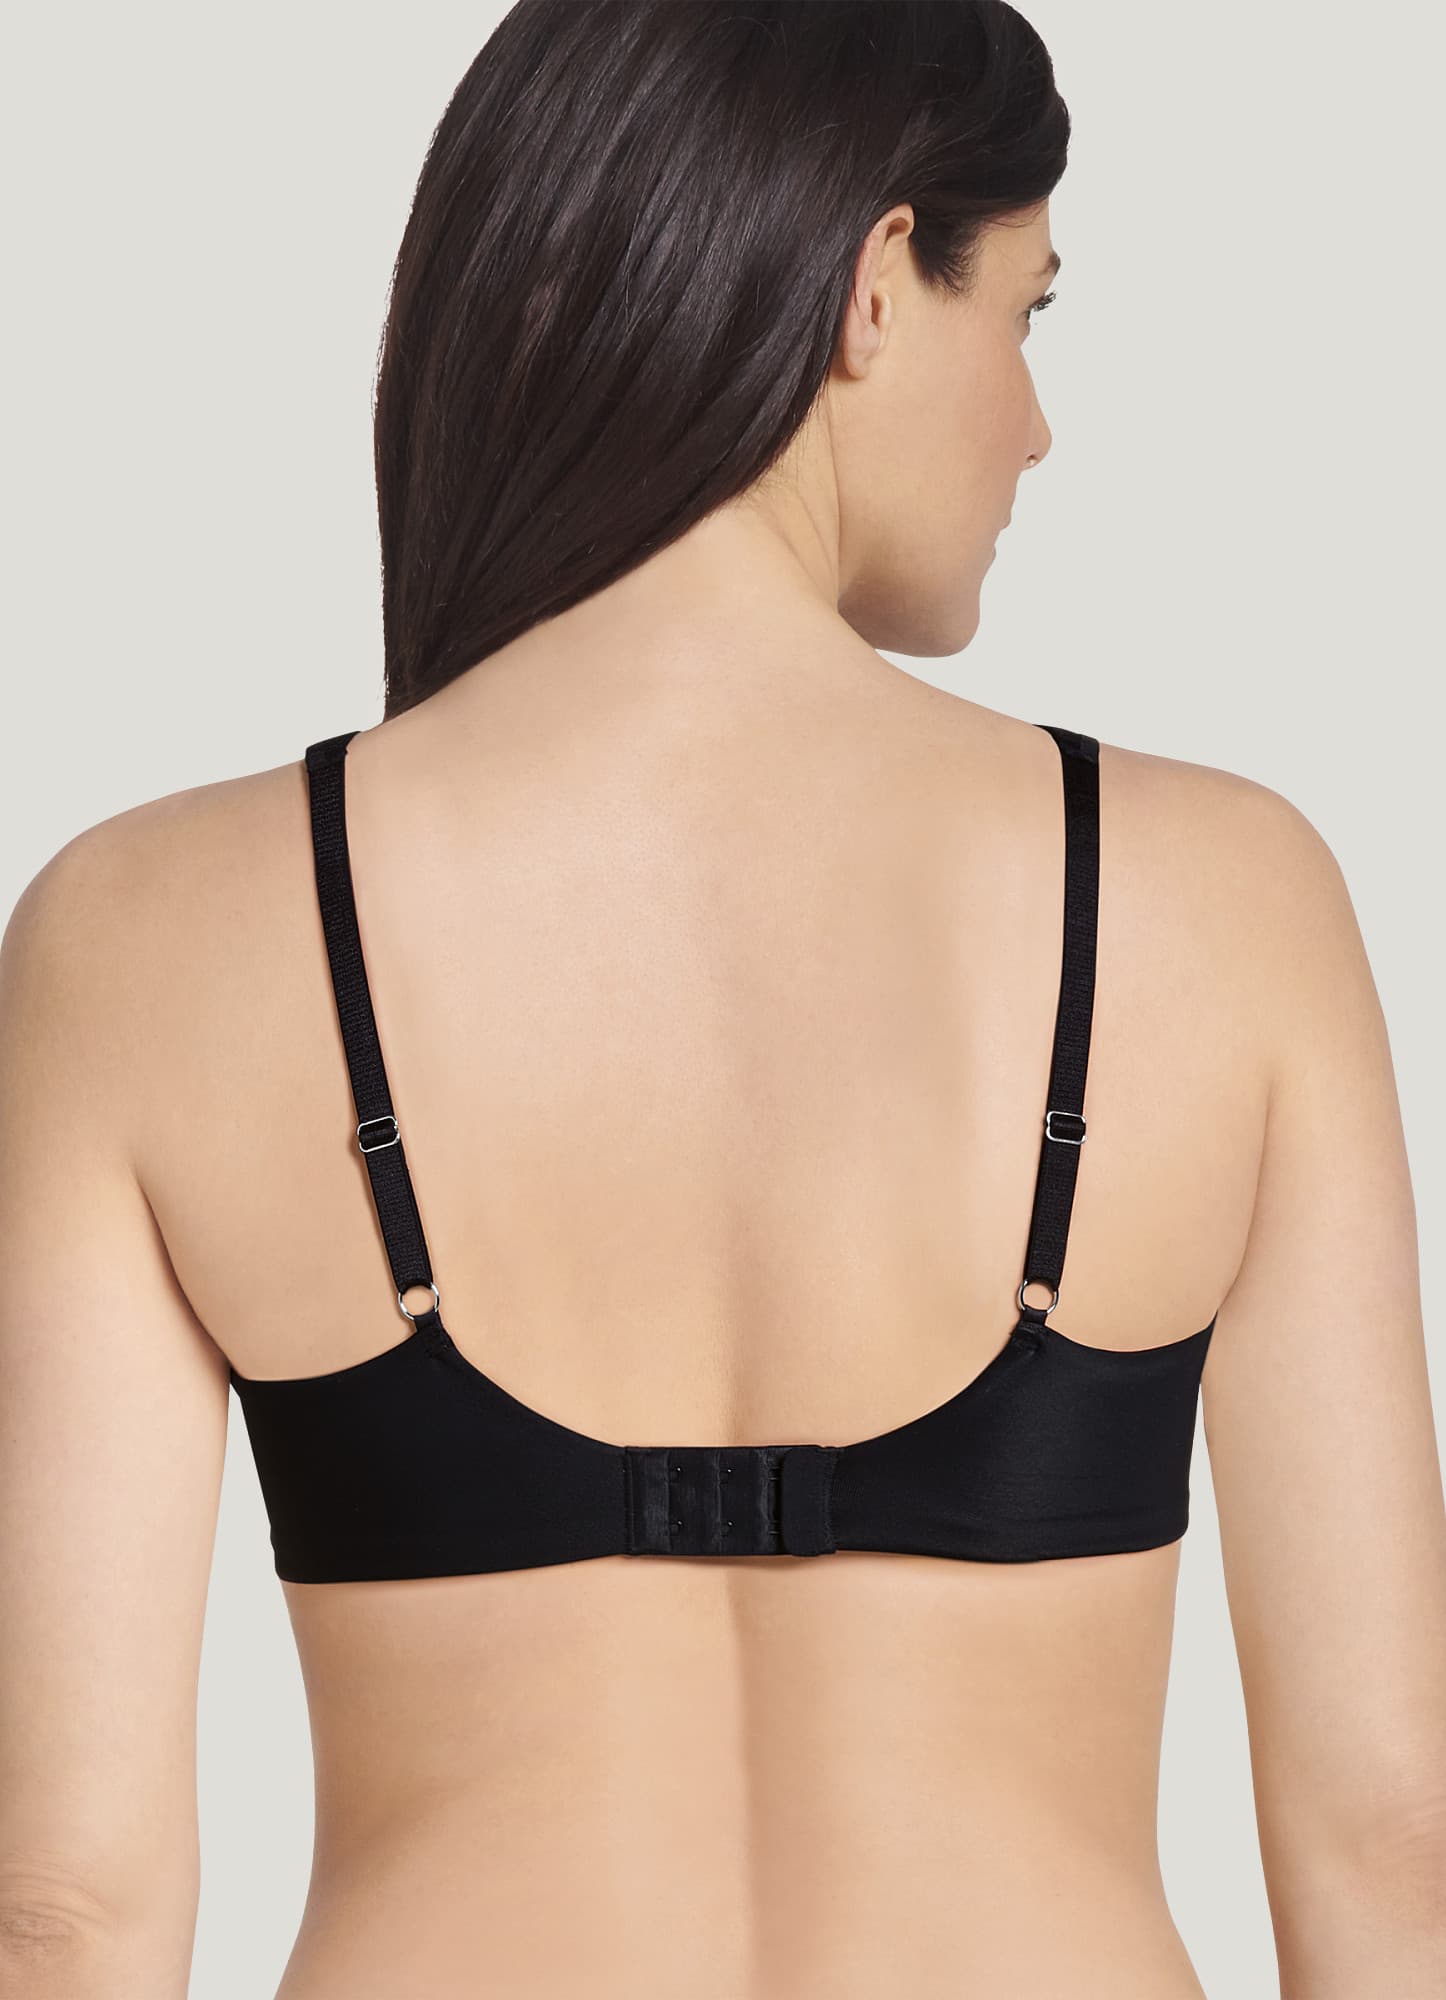 Reveal Low-Key Less is More Unlined Comfort Bra 32D, Barely There at   Women's Clothing store